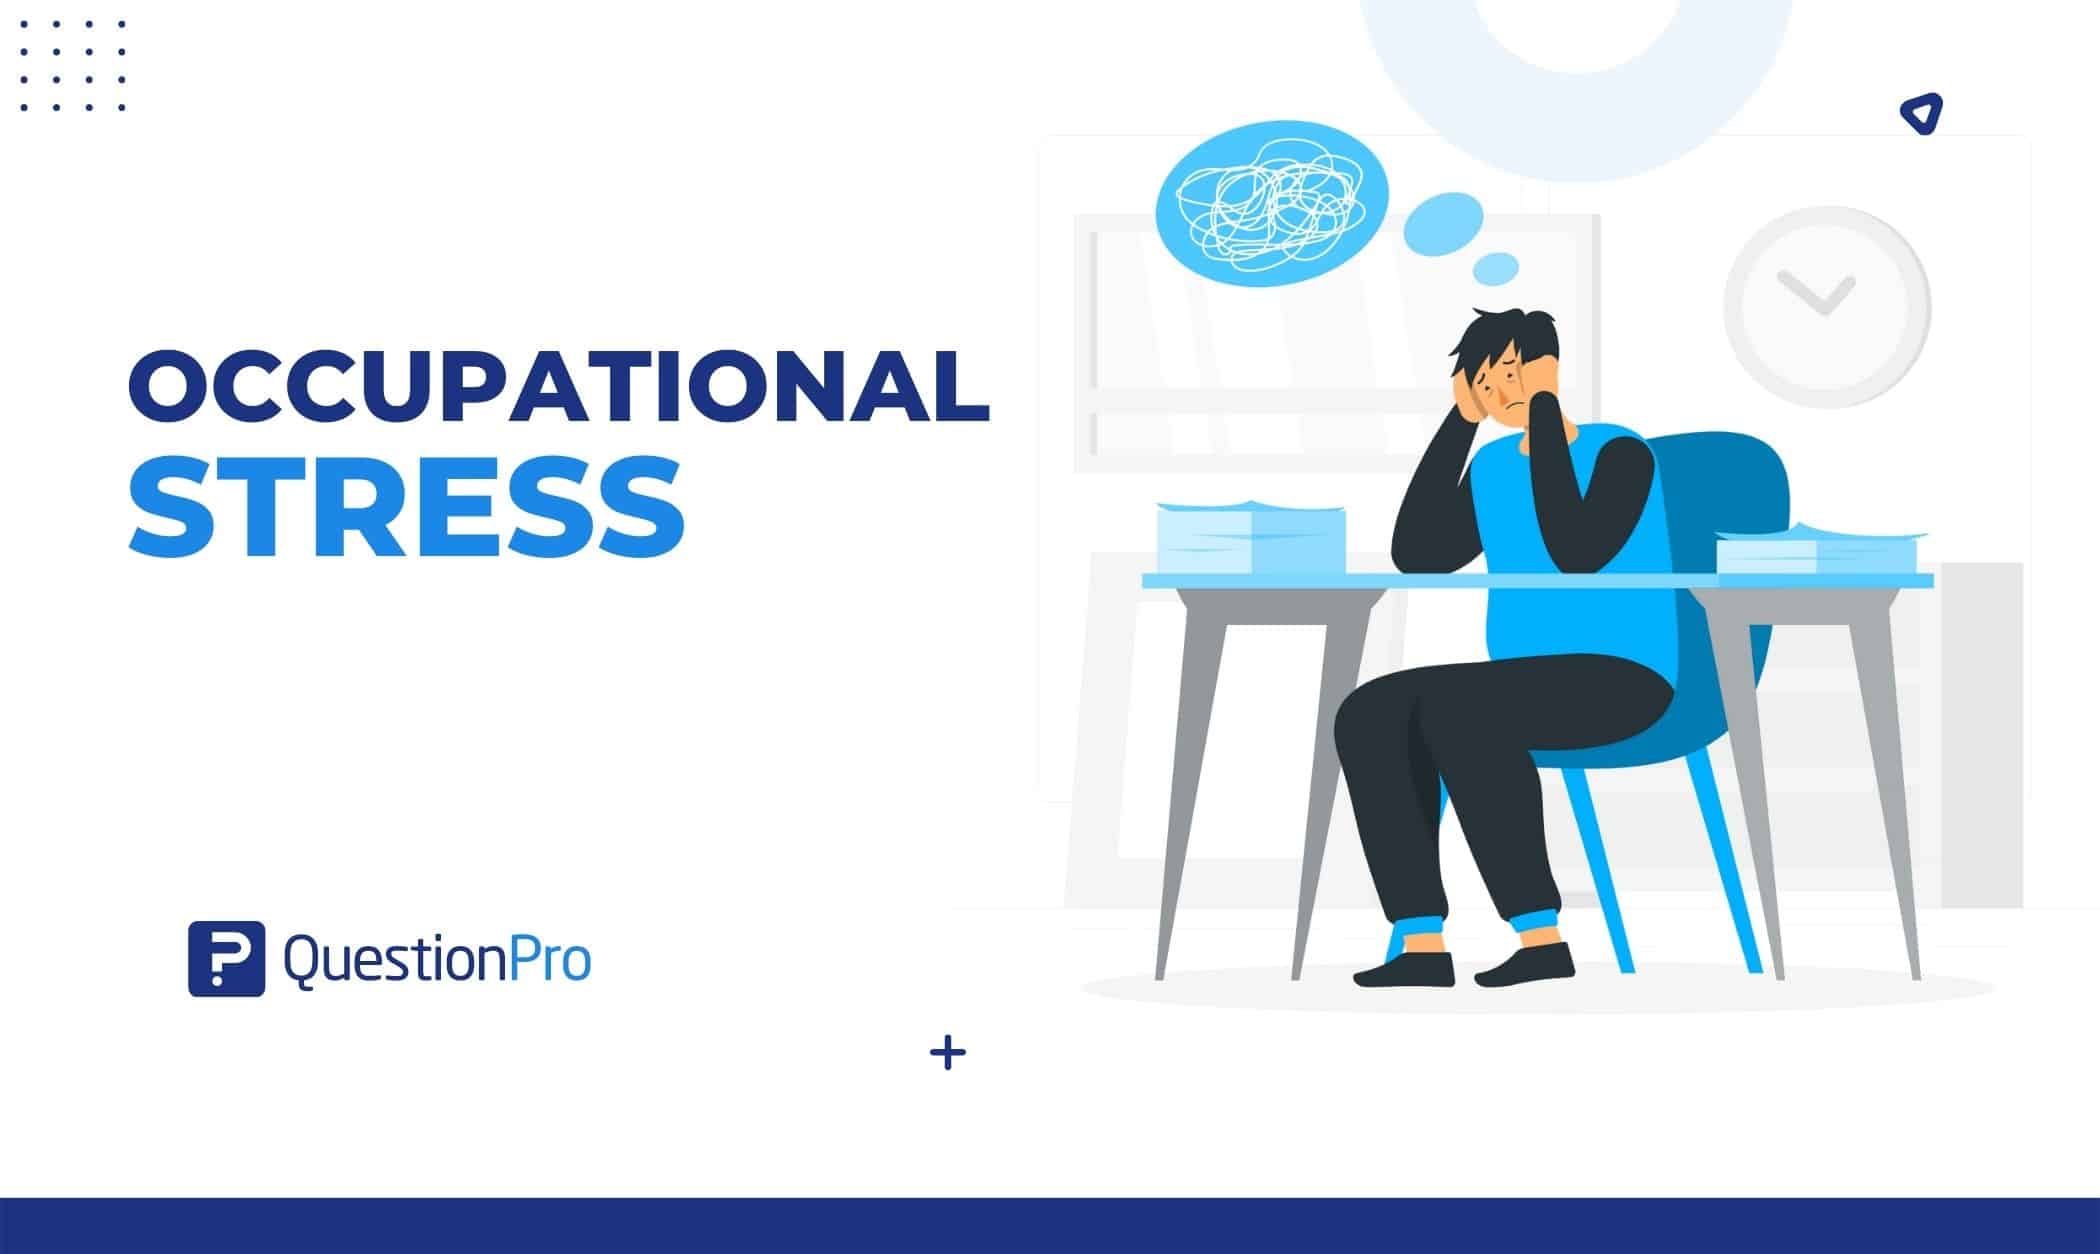 Occupational stress has been connected to some physical and mental health issues. It can be managed by being aware of the stressful work environment.